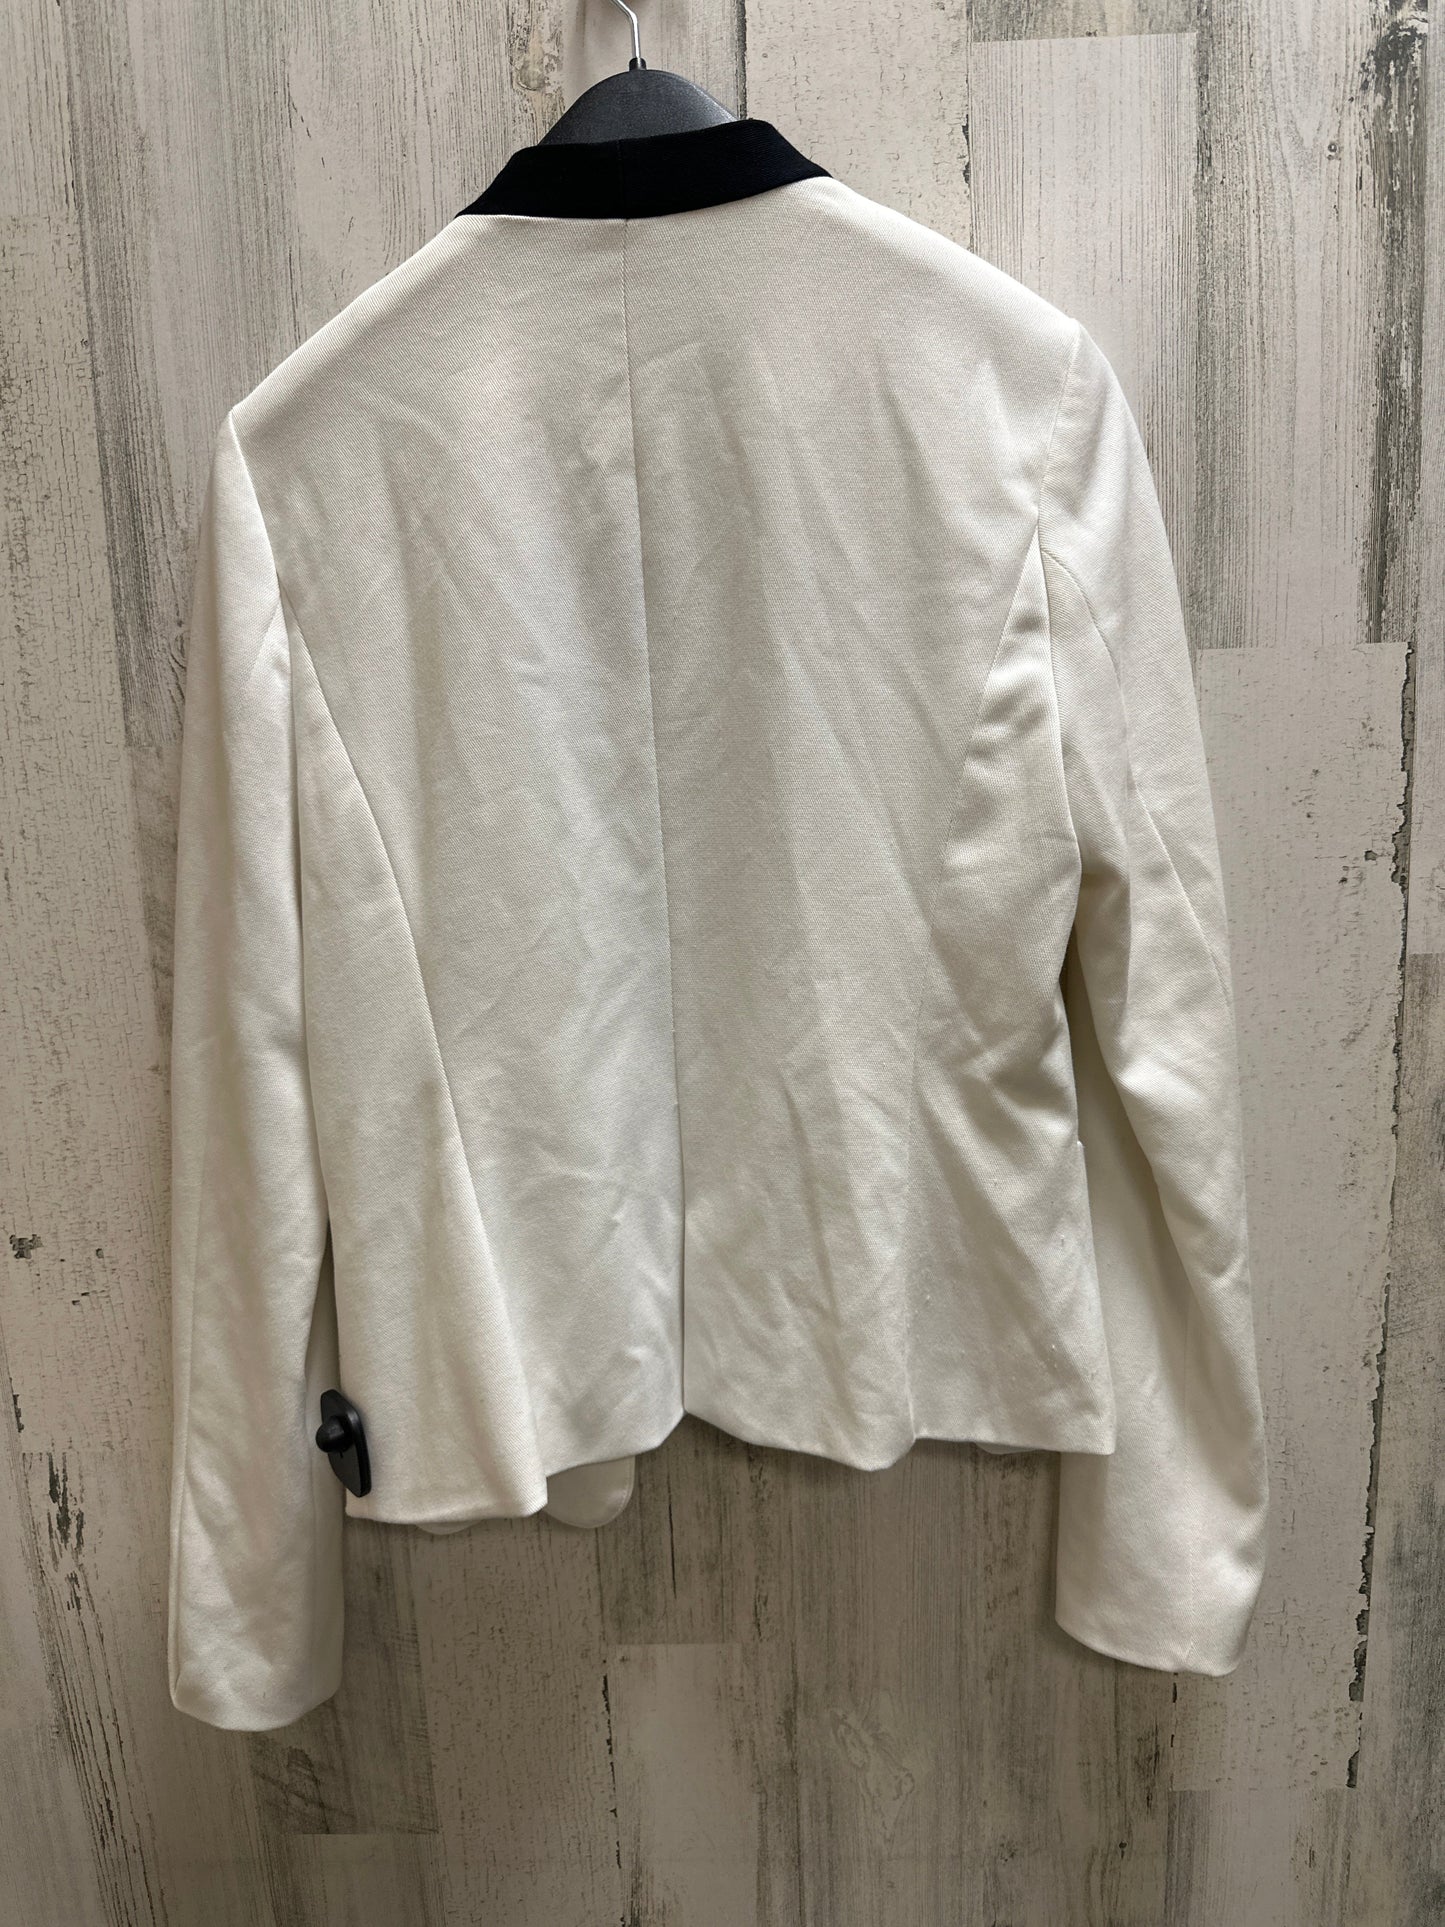 Jacket Other By Forever 21  Size: M